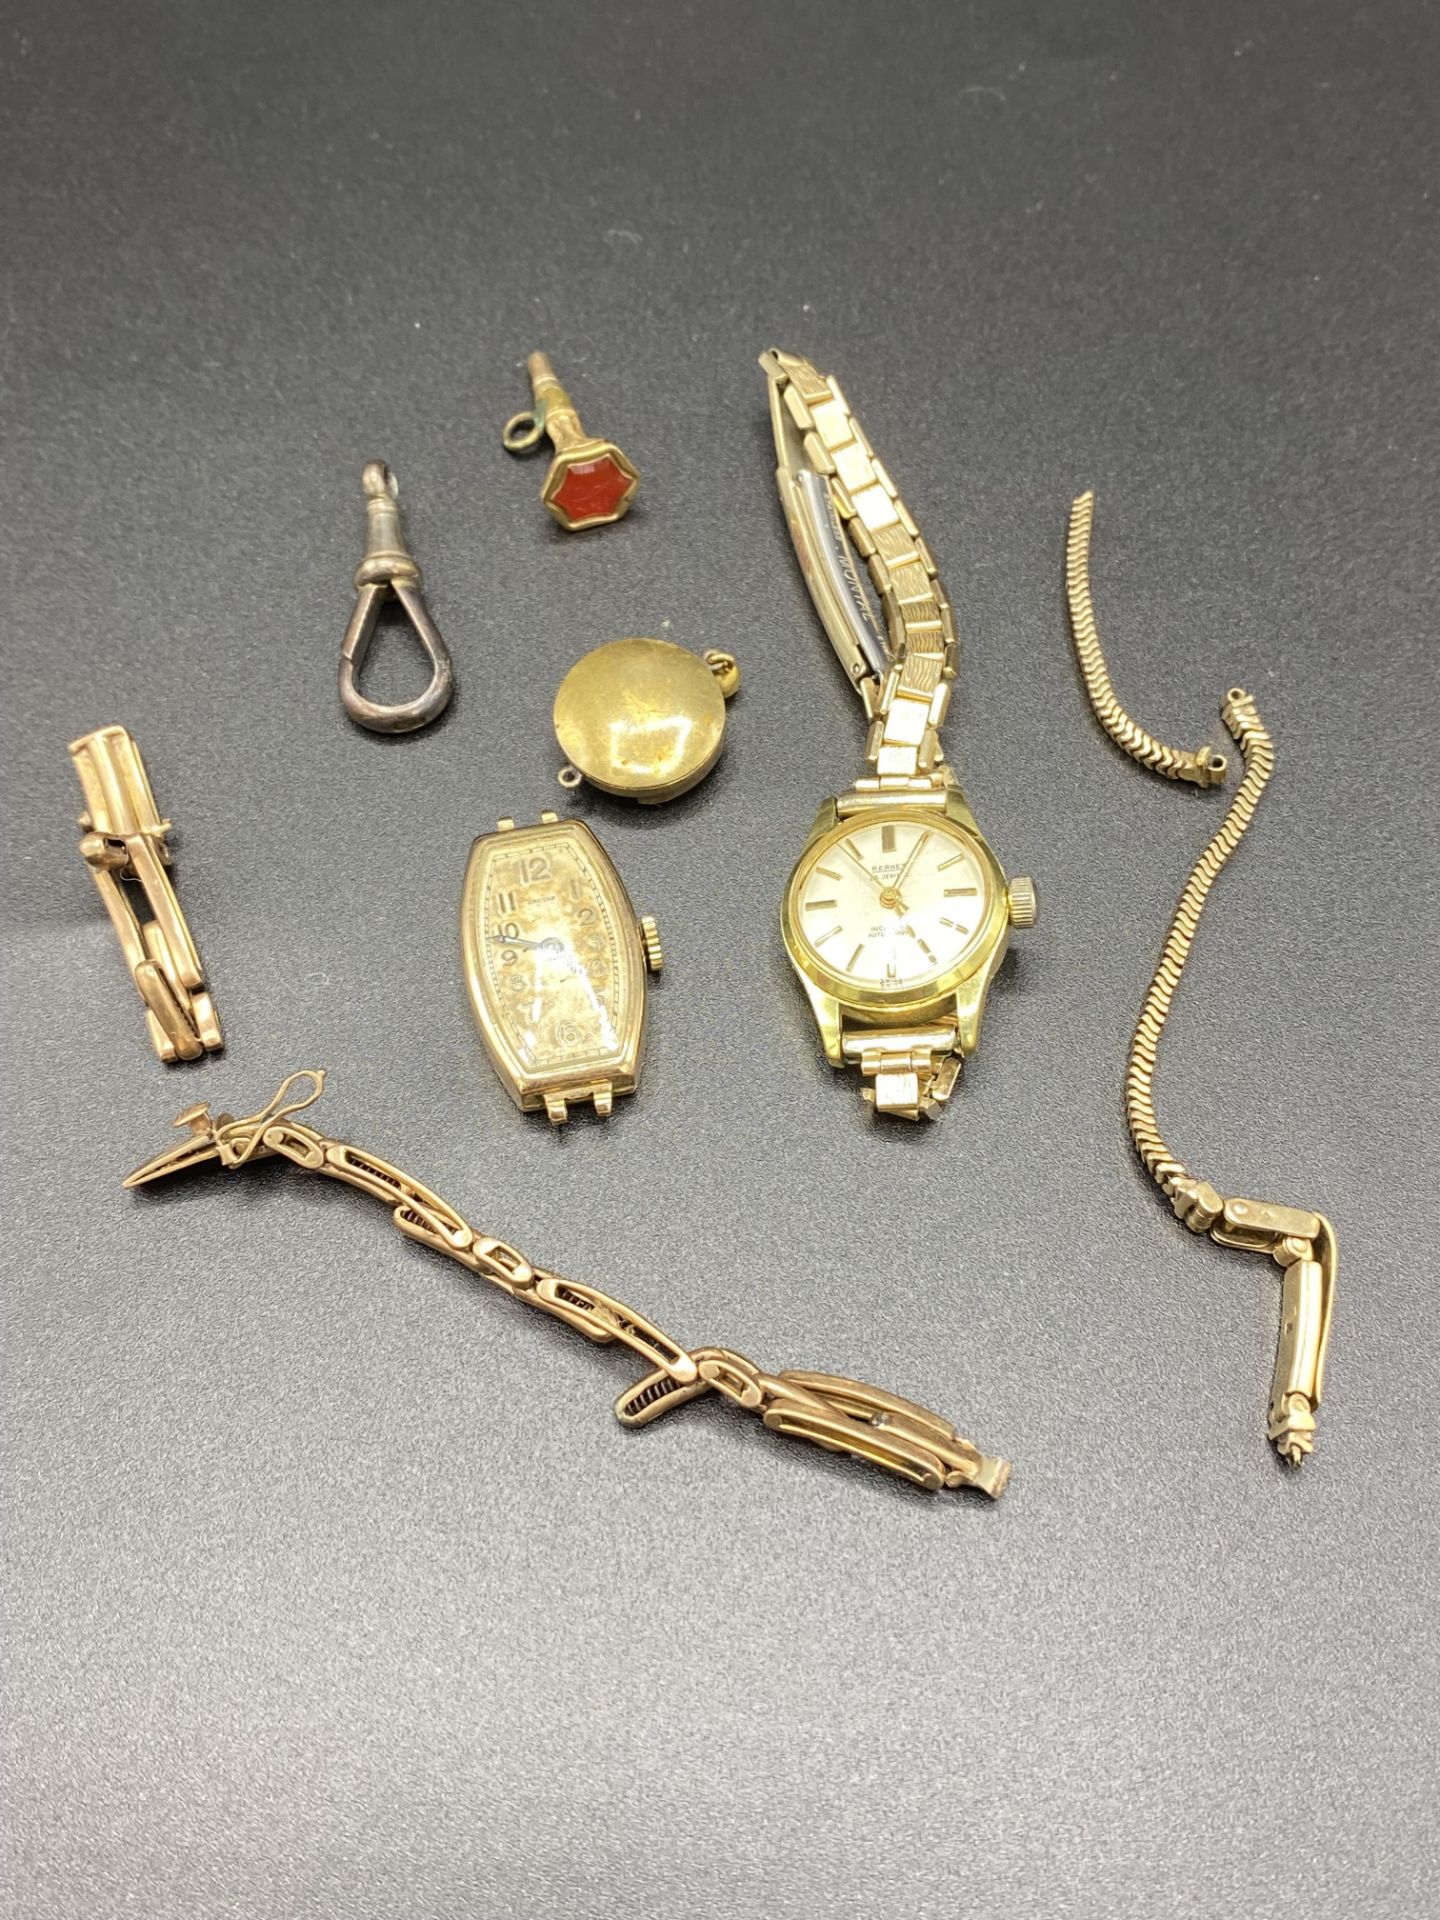 9ct gold wrist watch and other items